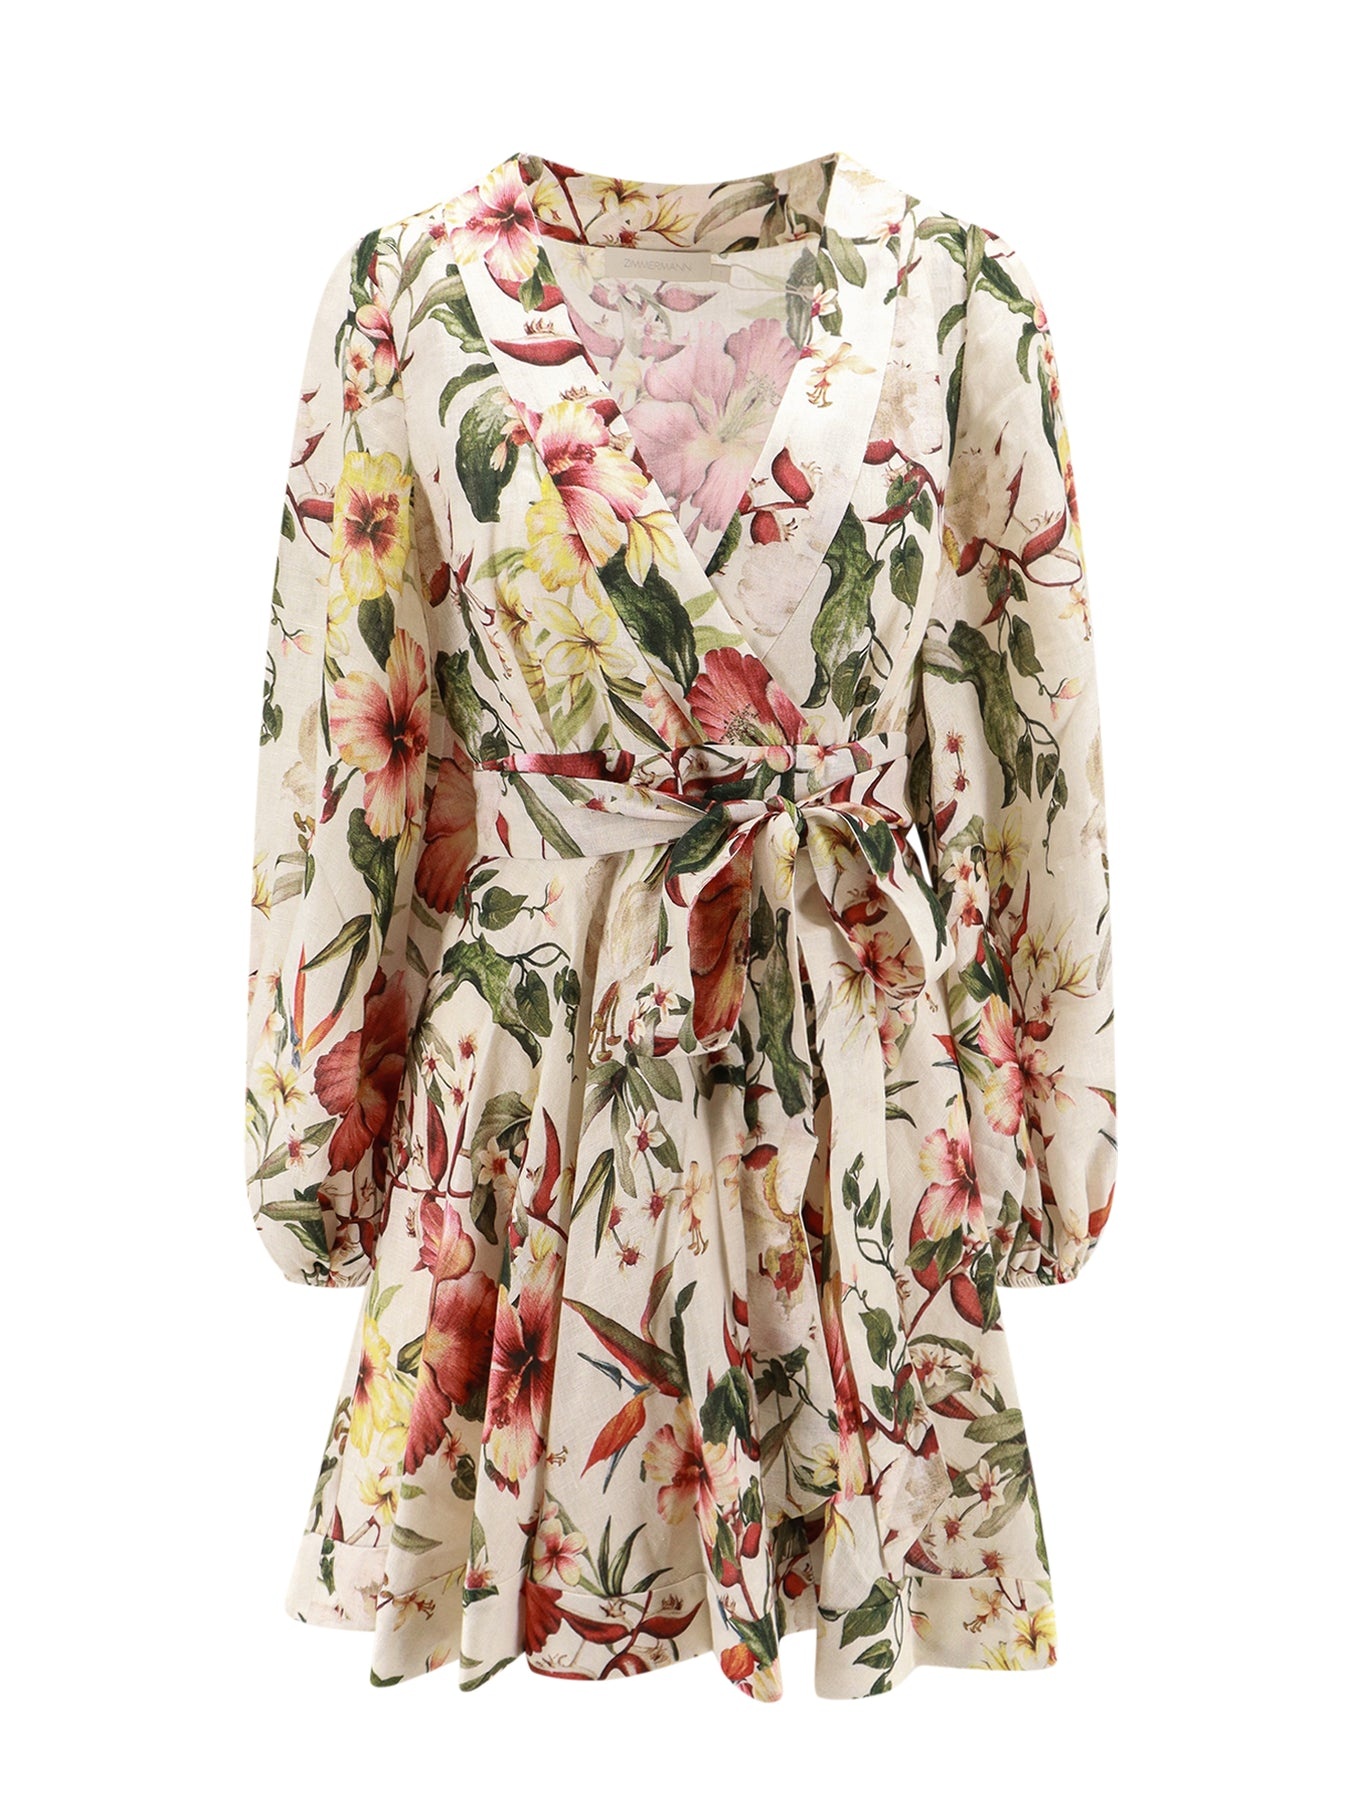 Linen dress with floral print - 1